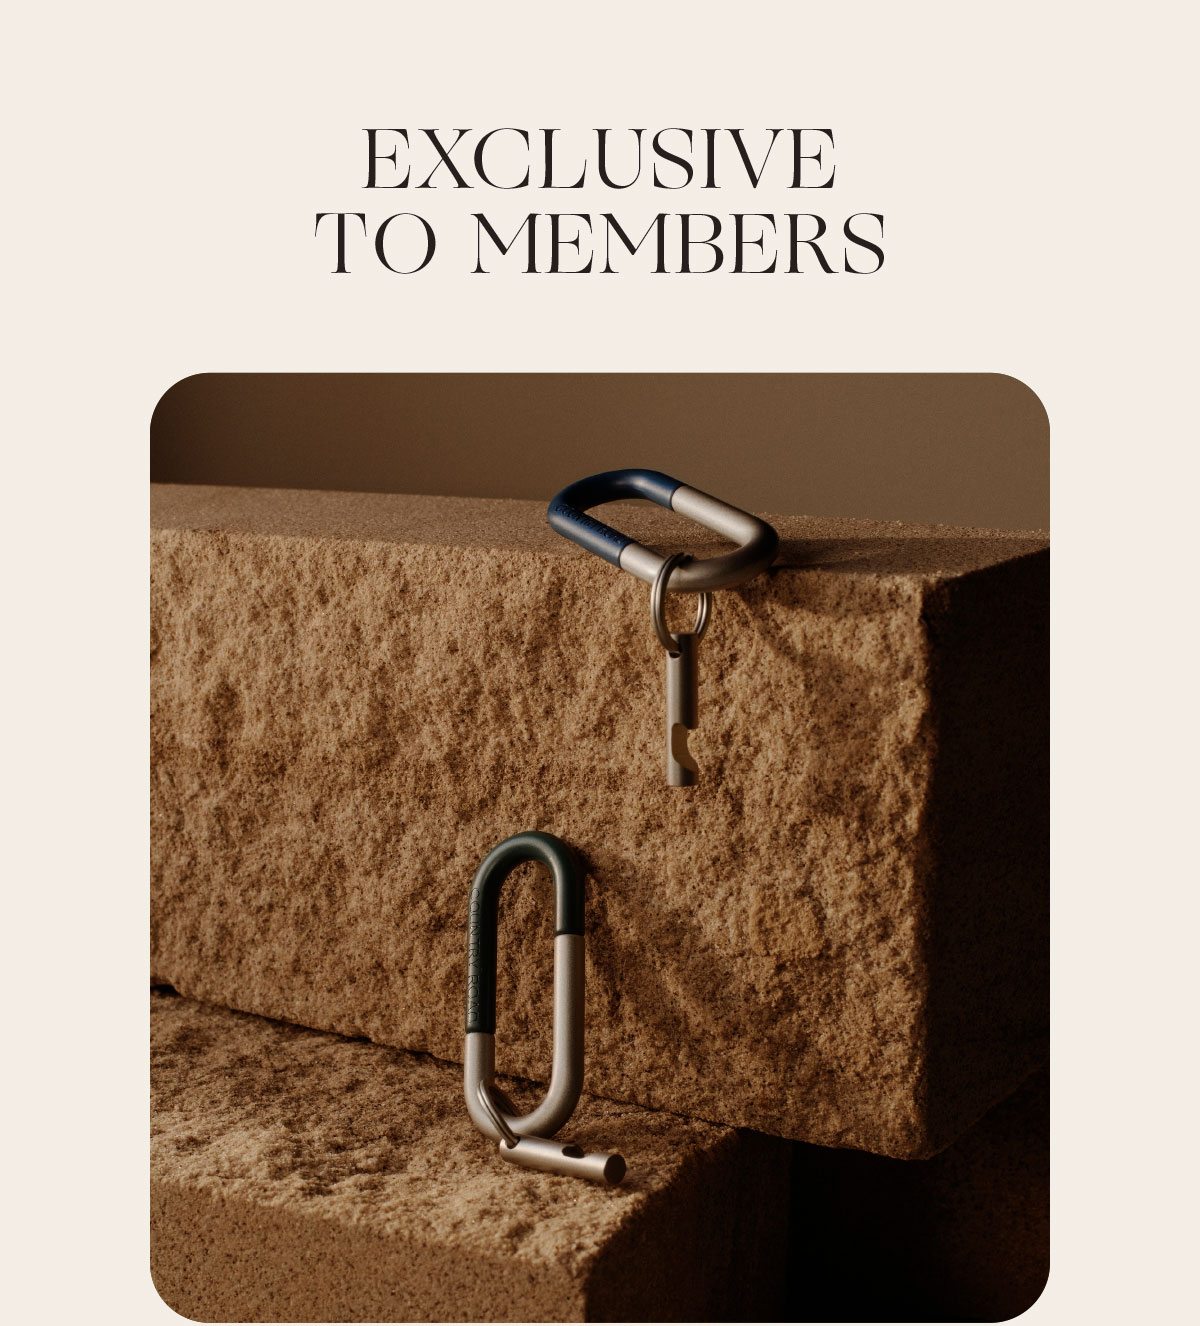 EXCLUSIVE TO MEMBERS